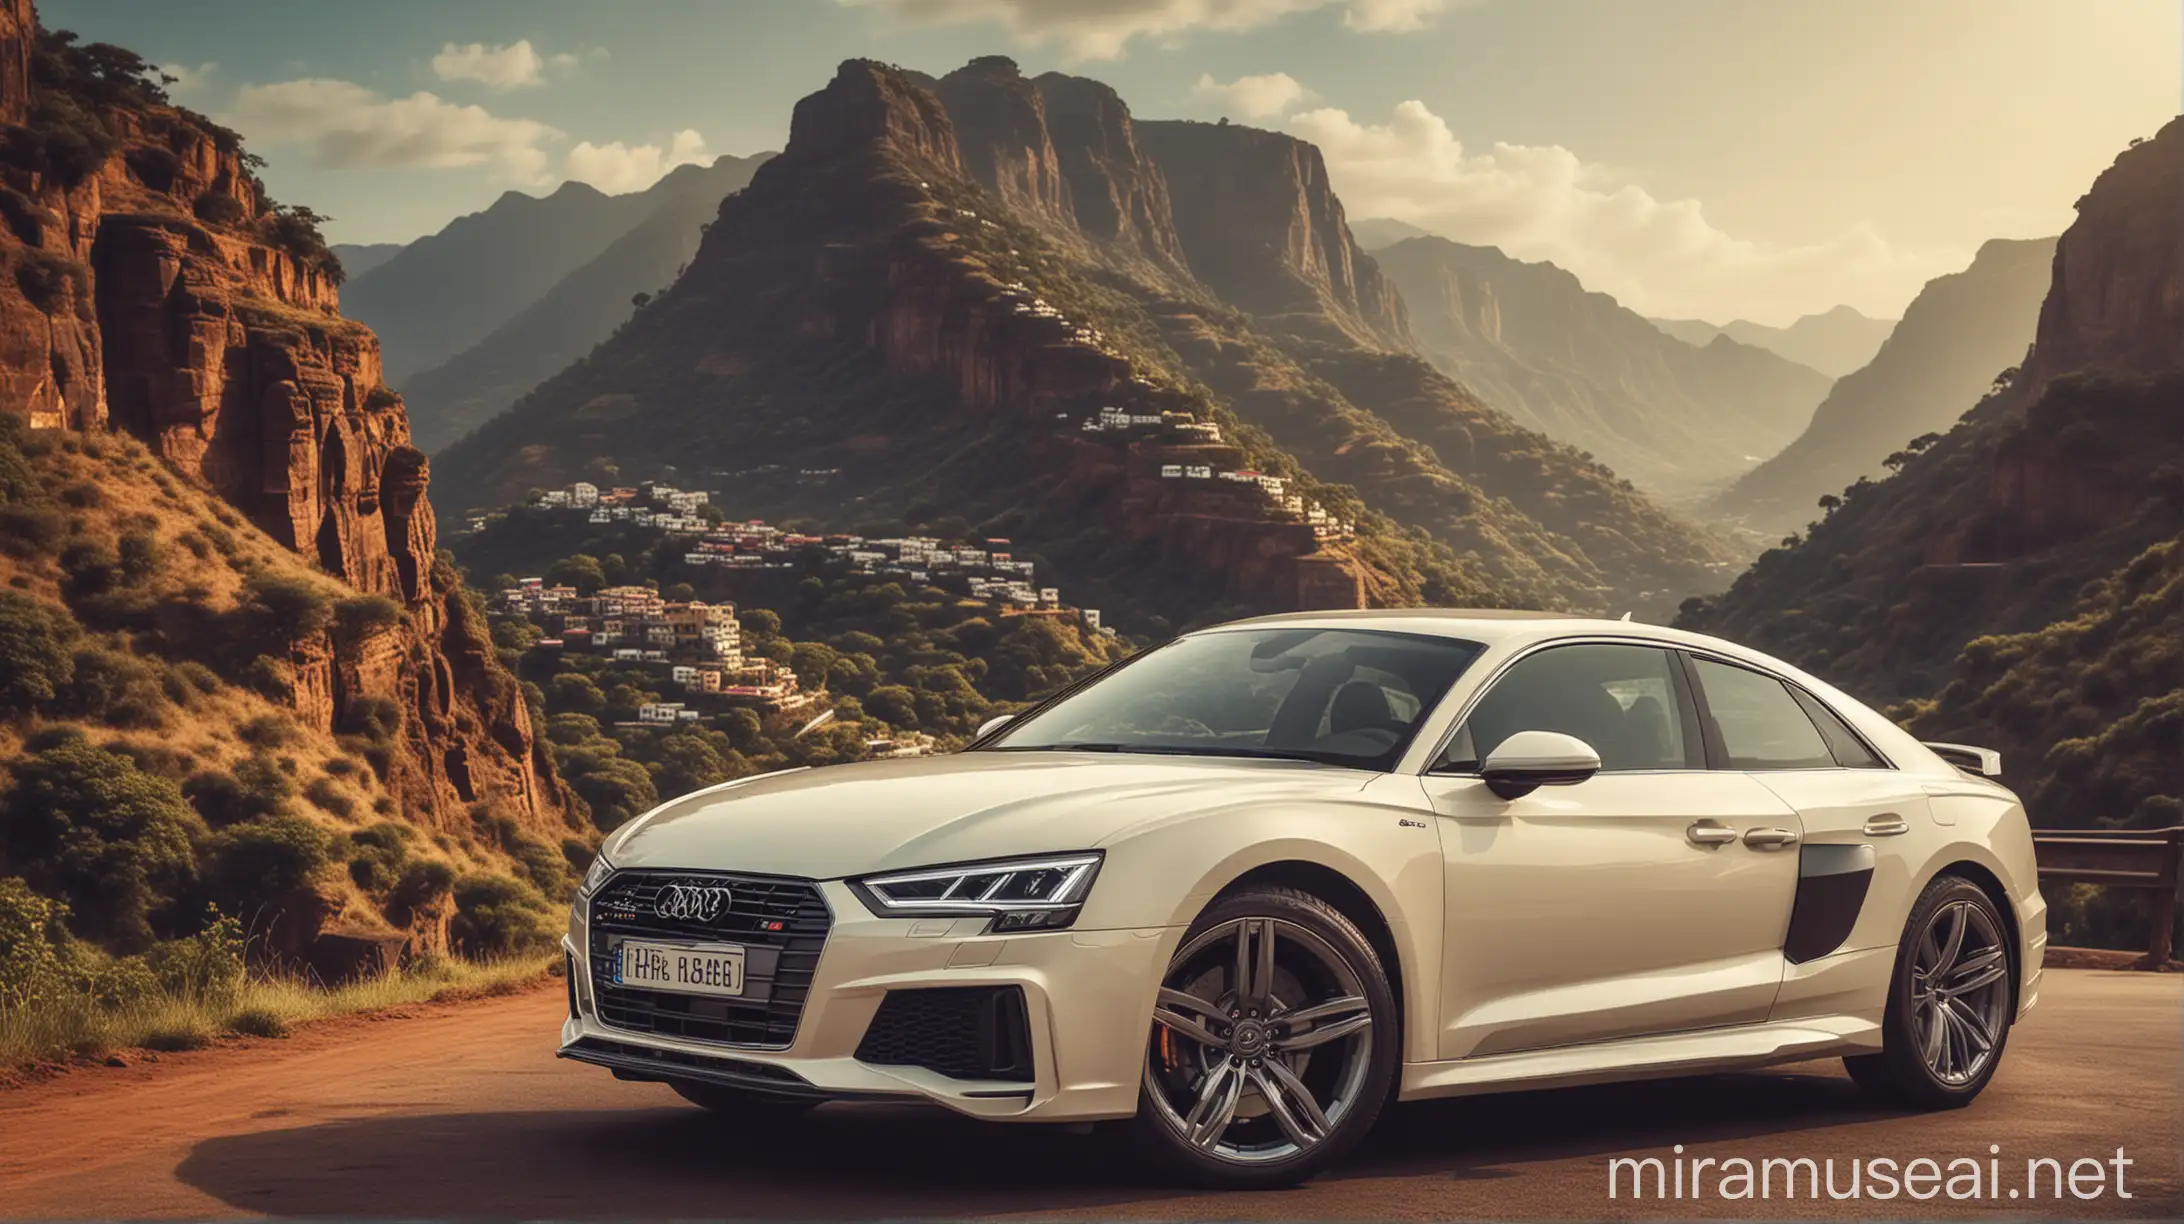 Adventure Romance with Audi iPhone and Social Media Icons in Khandala